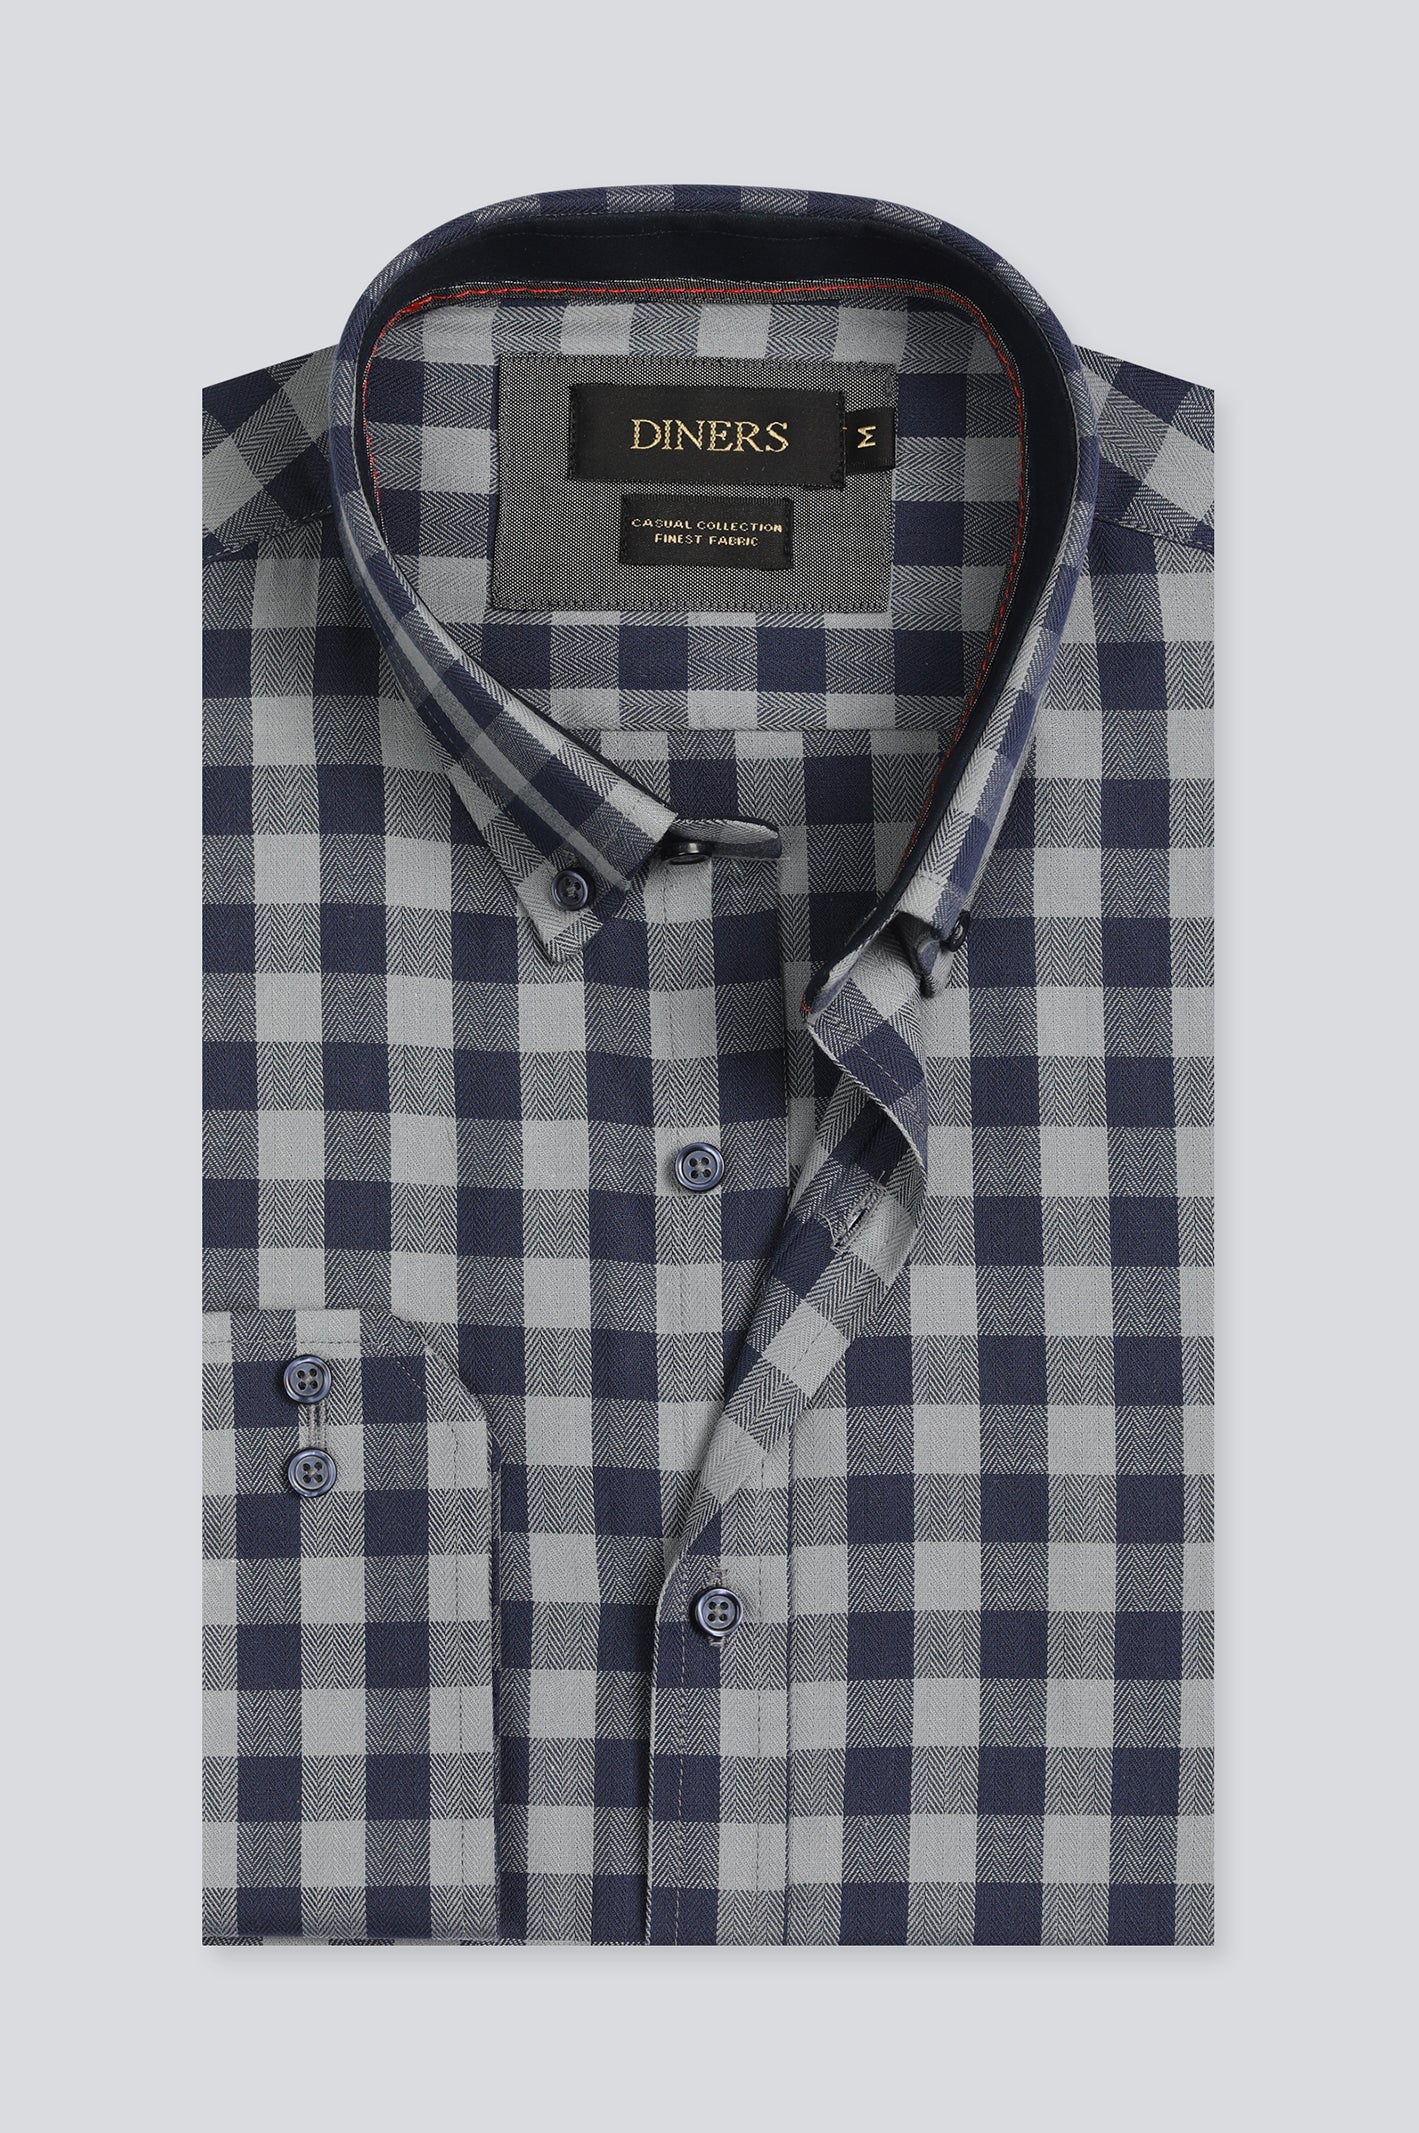 Grey Gingham Check Casual Shirt - Diners